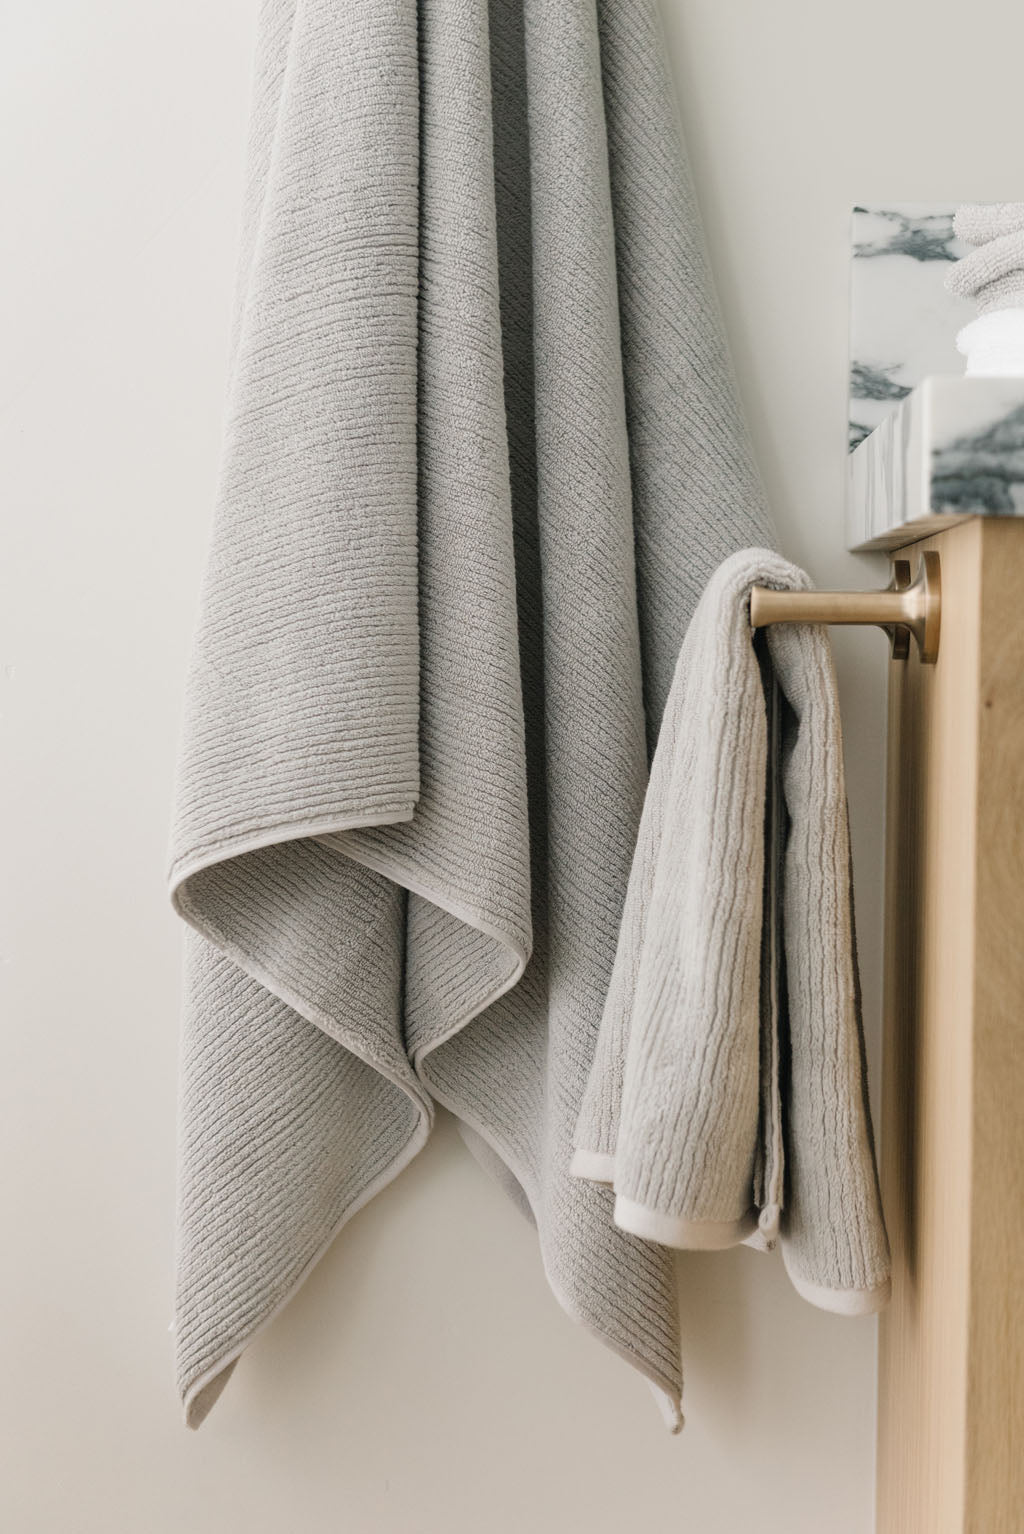 Ribbed Terry Bath Towel and Hand Towel in the color Light Grey. Photo of Ribbed Terry Bath Towel and Hand Towel taken as the Light Grey Ribbed Terry Bath Towel and Hand Towel is hanging from a towel hook in a bathroom. |Color: Light Grey